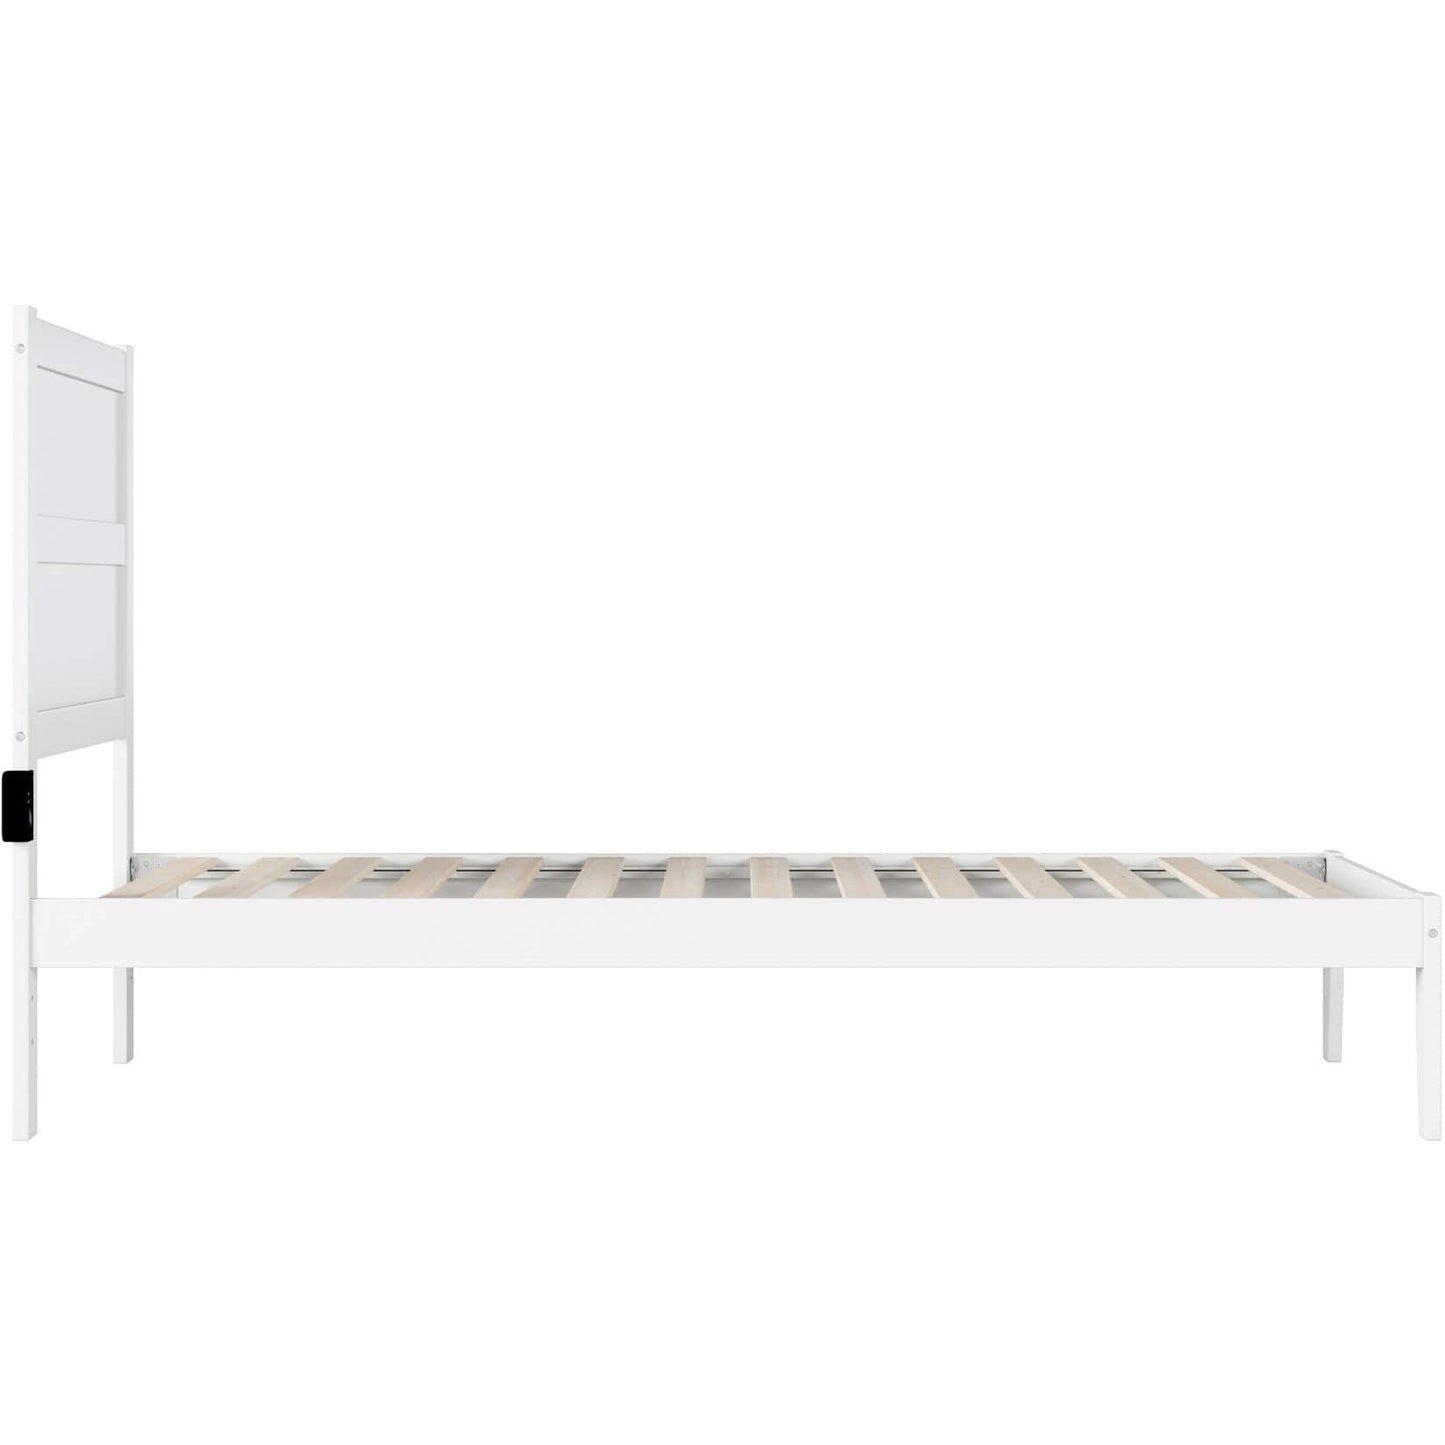 AFI Furnishings NoHo Twin Extra Long Bed in White AG9110012